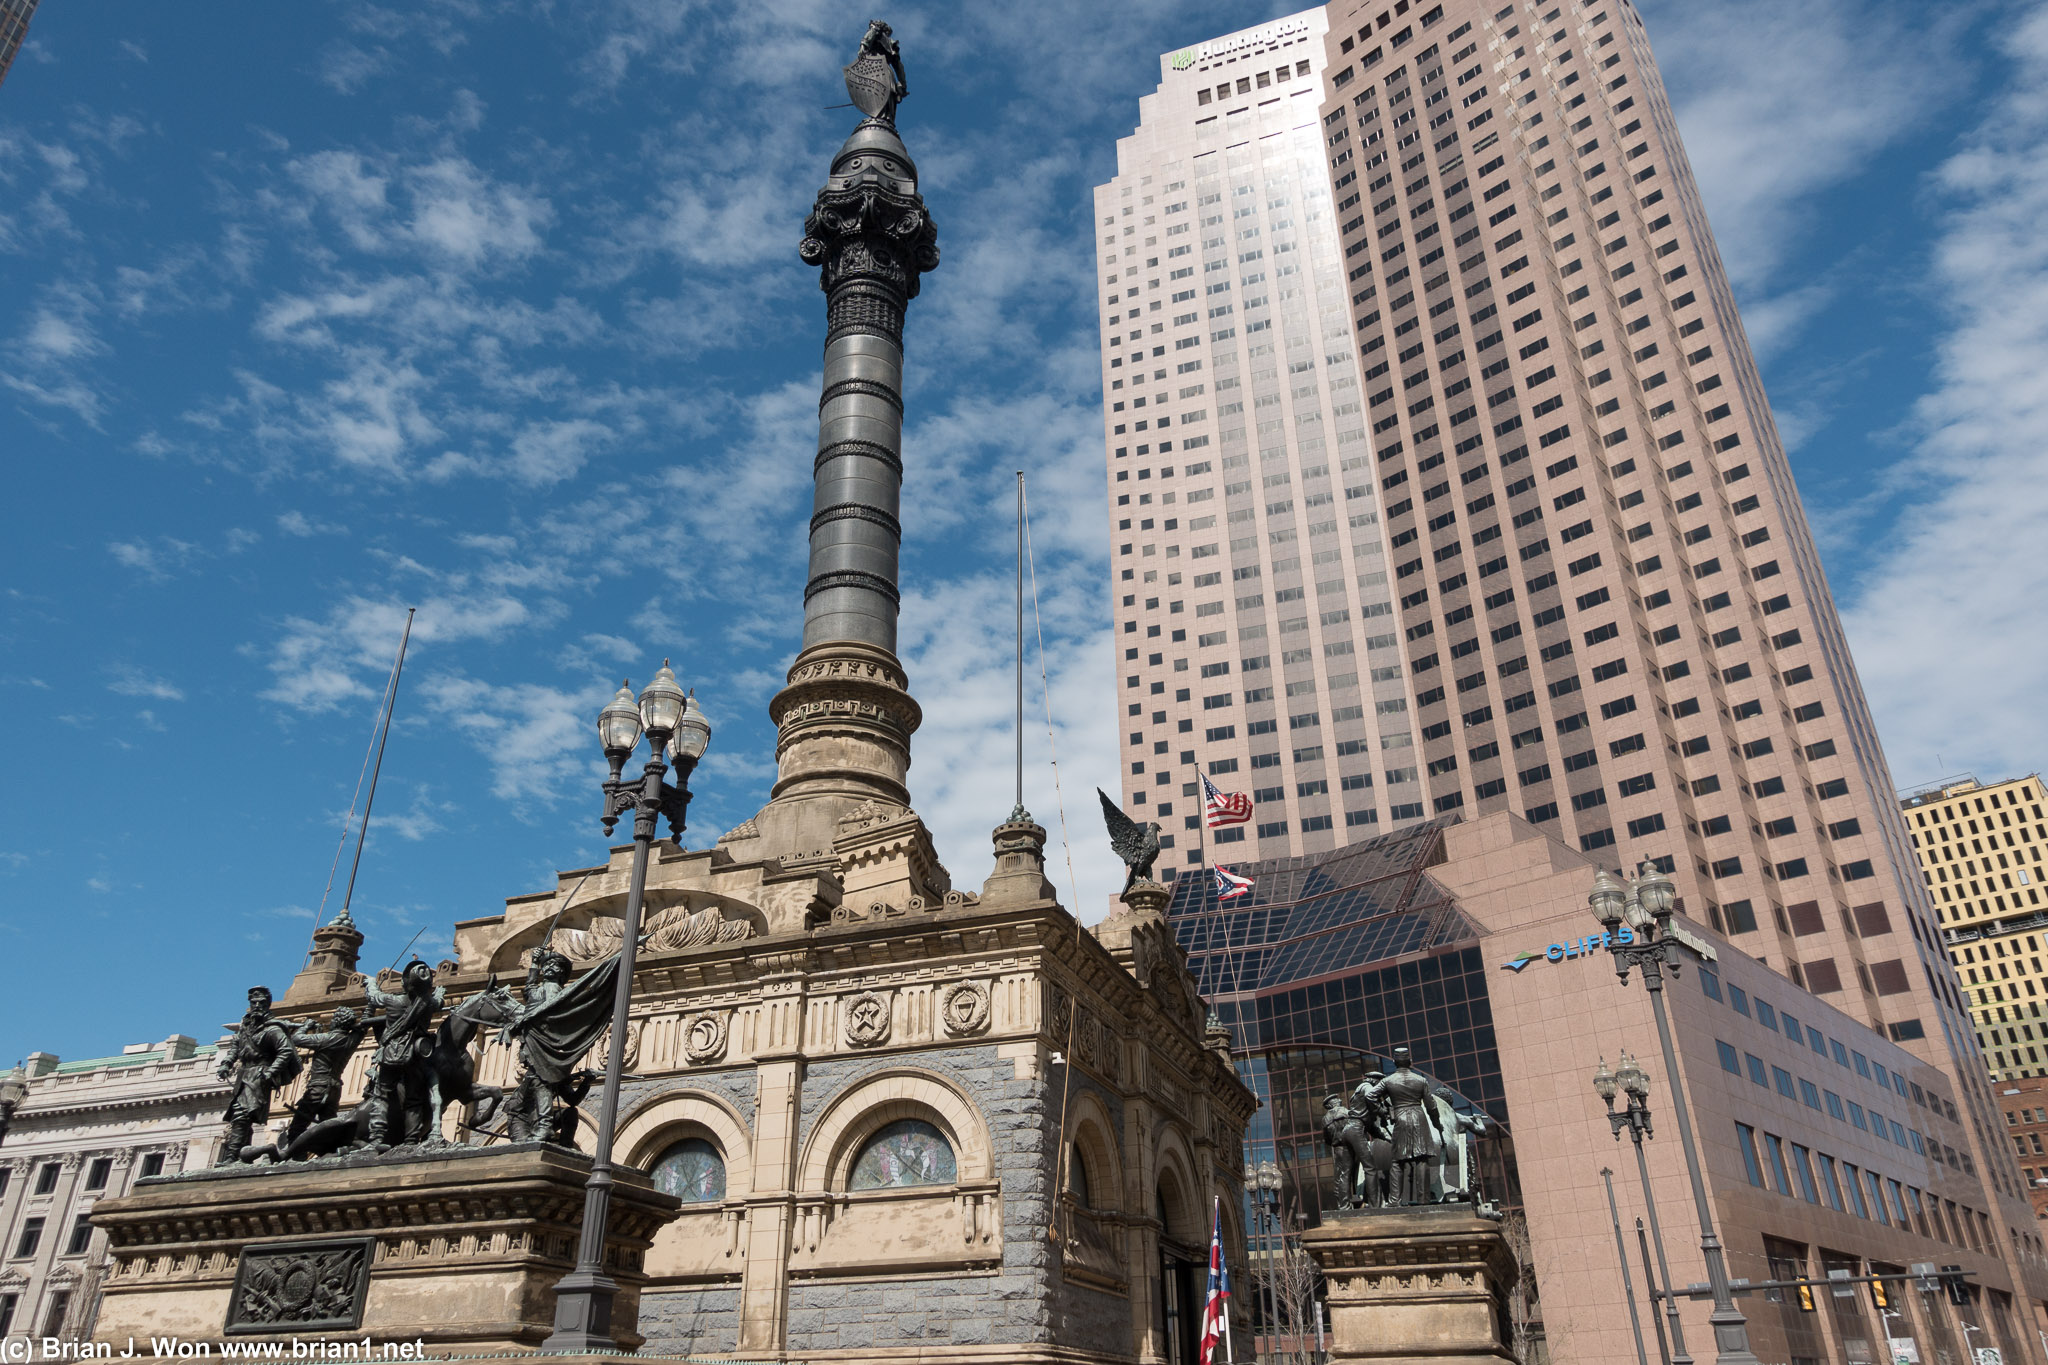 Soldiers and Sailors Monument, with 200 Public Square in the background.